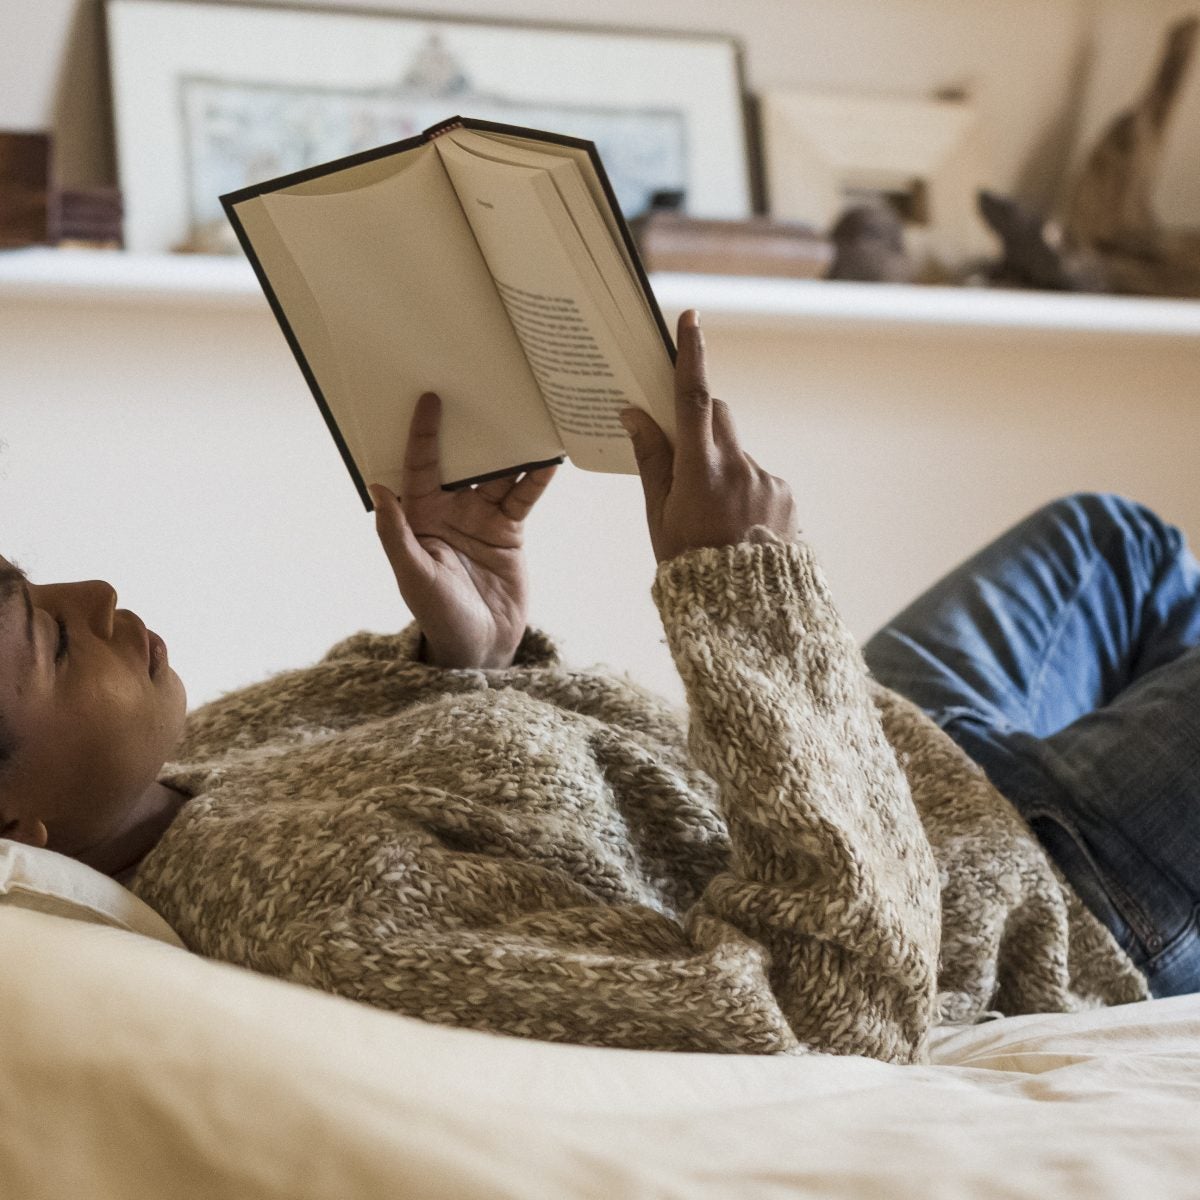 18 Books To Read At Home Over Your Holiday Break